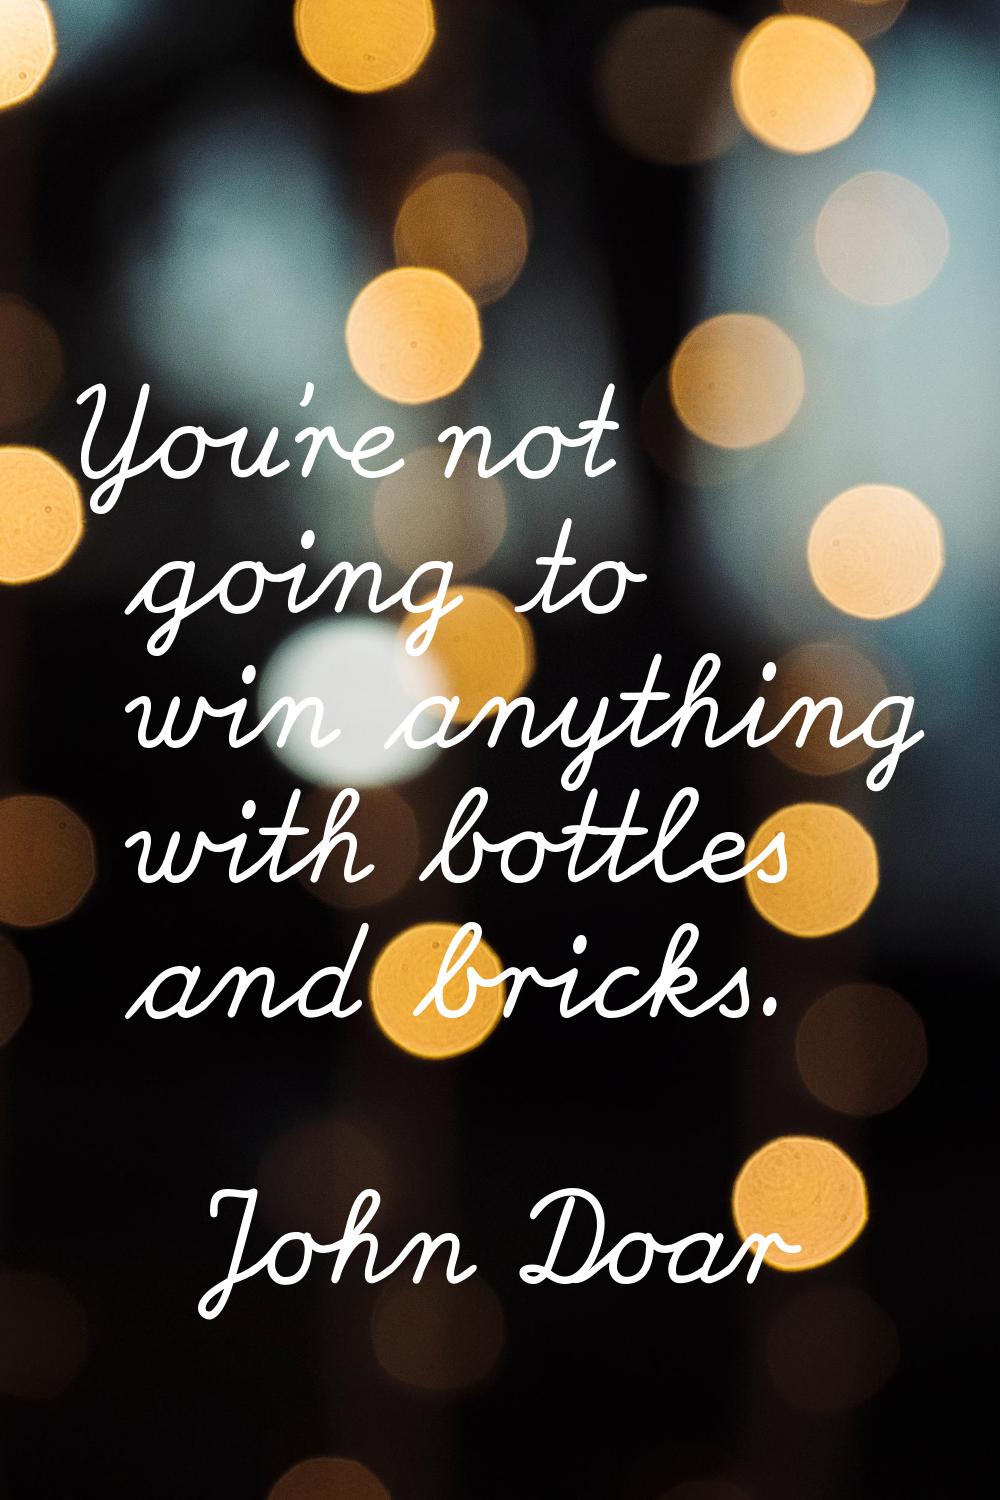 You're not going to win anything with bottles and bricks.